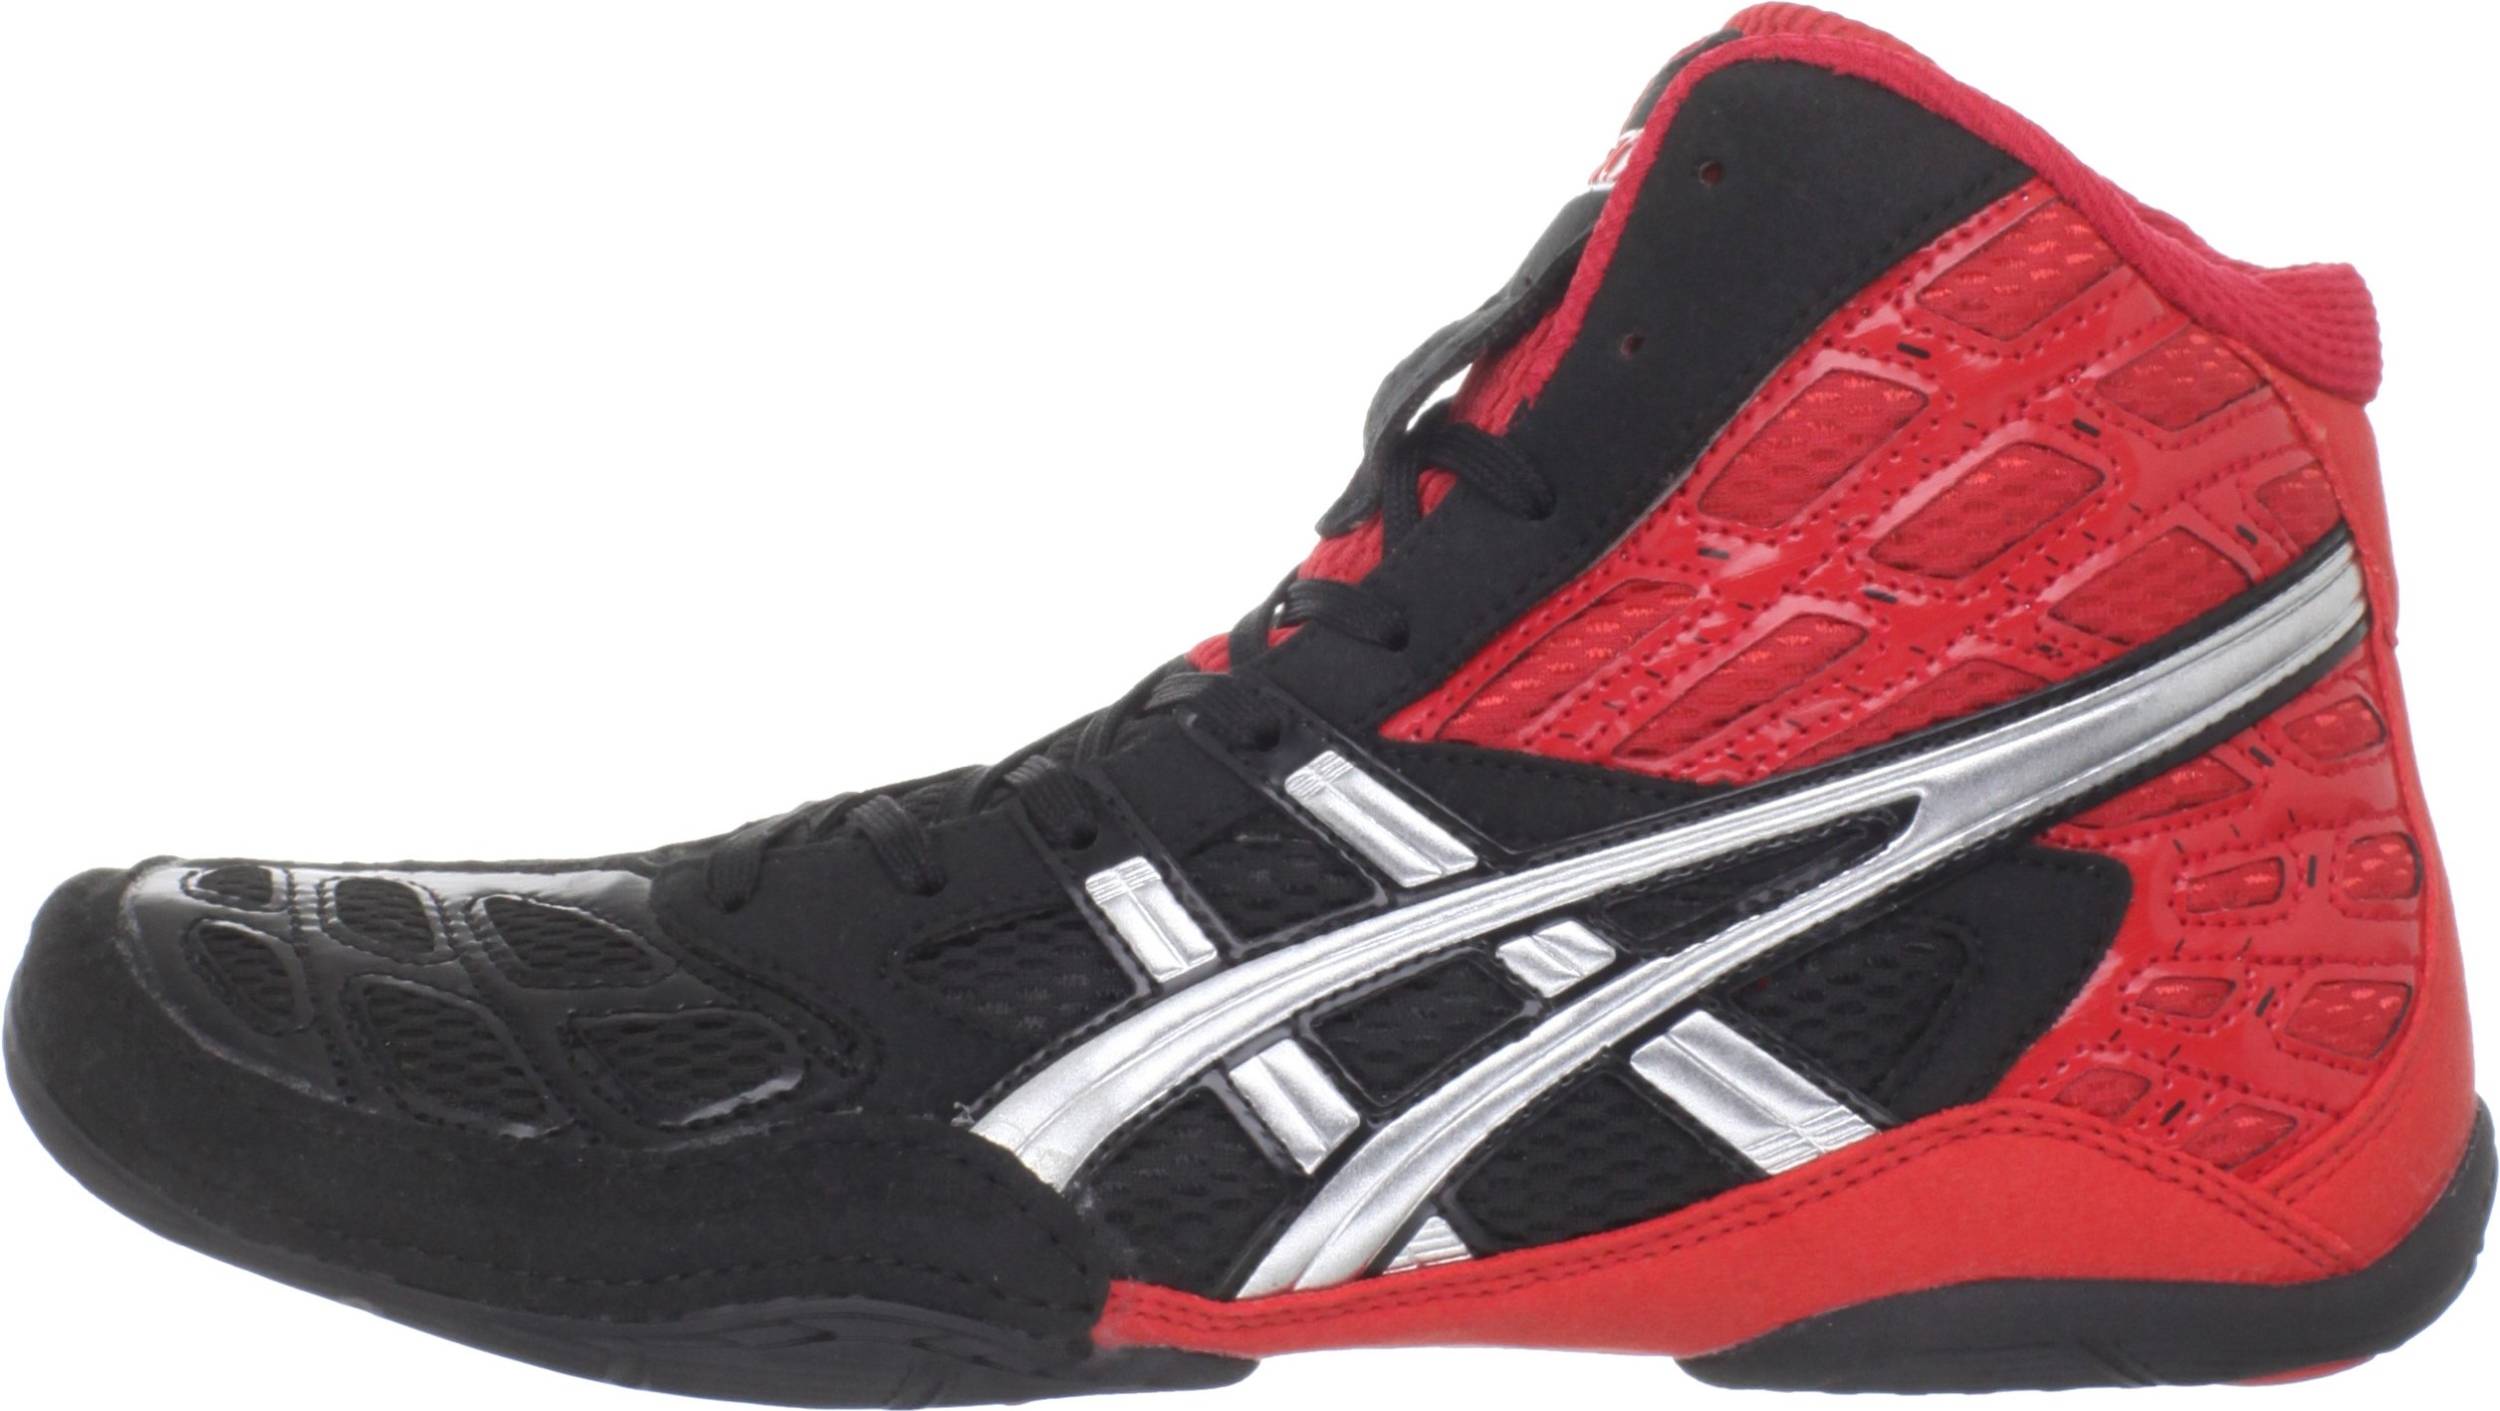 Only $60 + Review of Asics Split Second 9 | RunRepeat